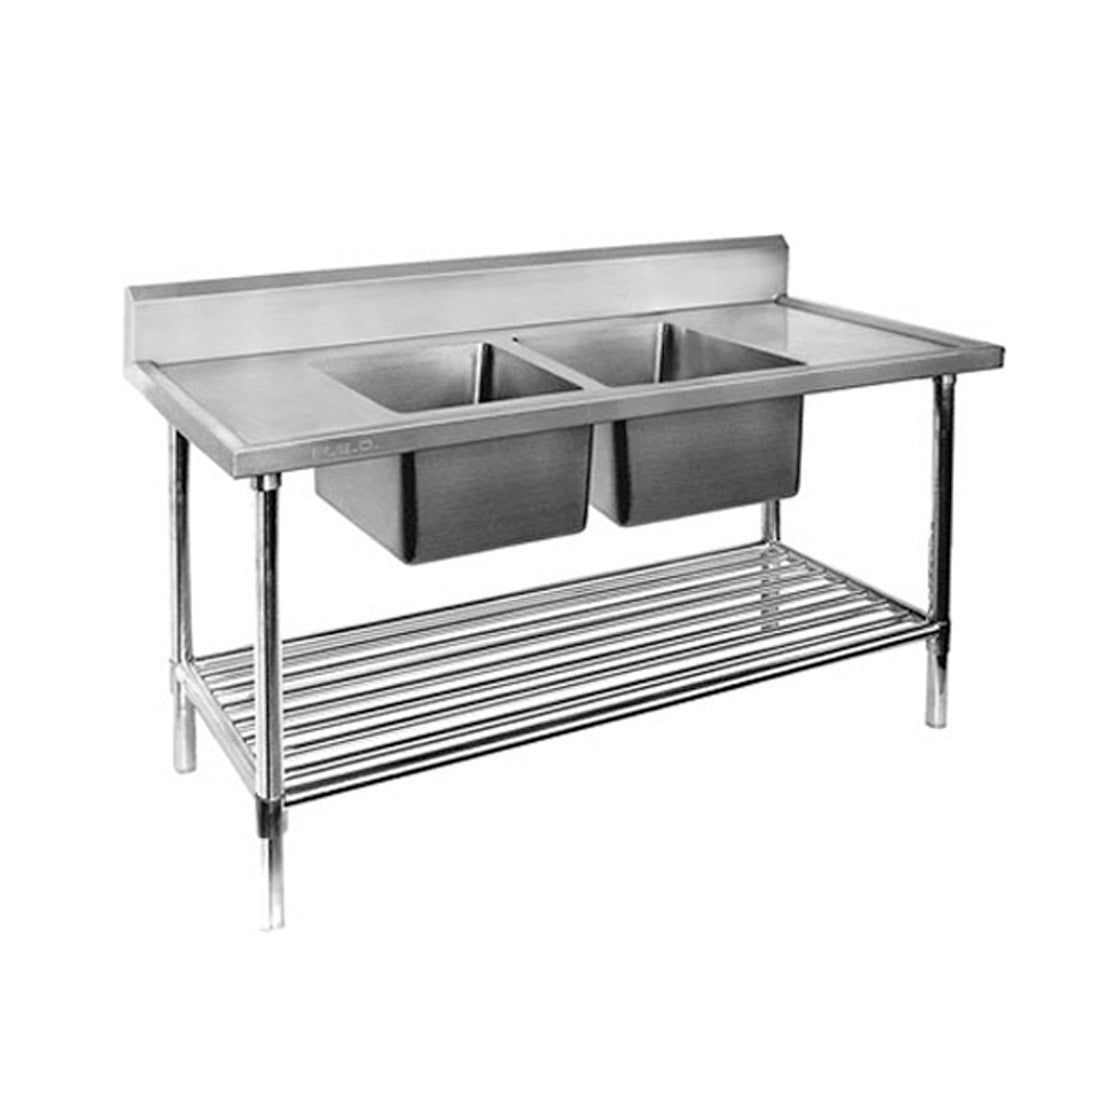 Modular Systems Double Centre Sink Bench with Pot Undershelf 1200x700x900 DSB7-1200C/A